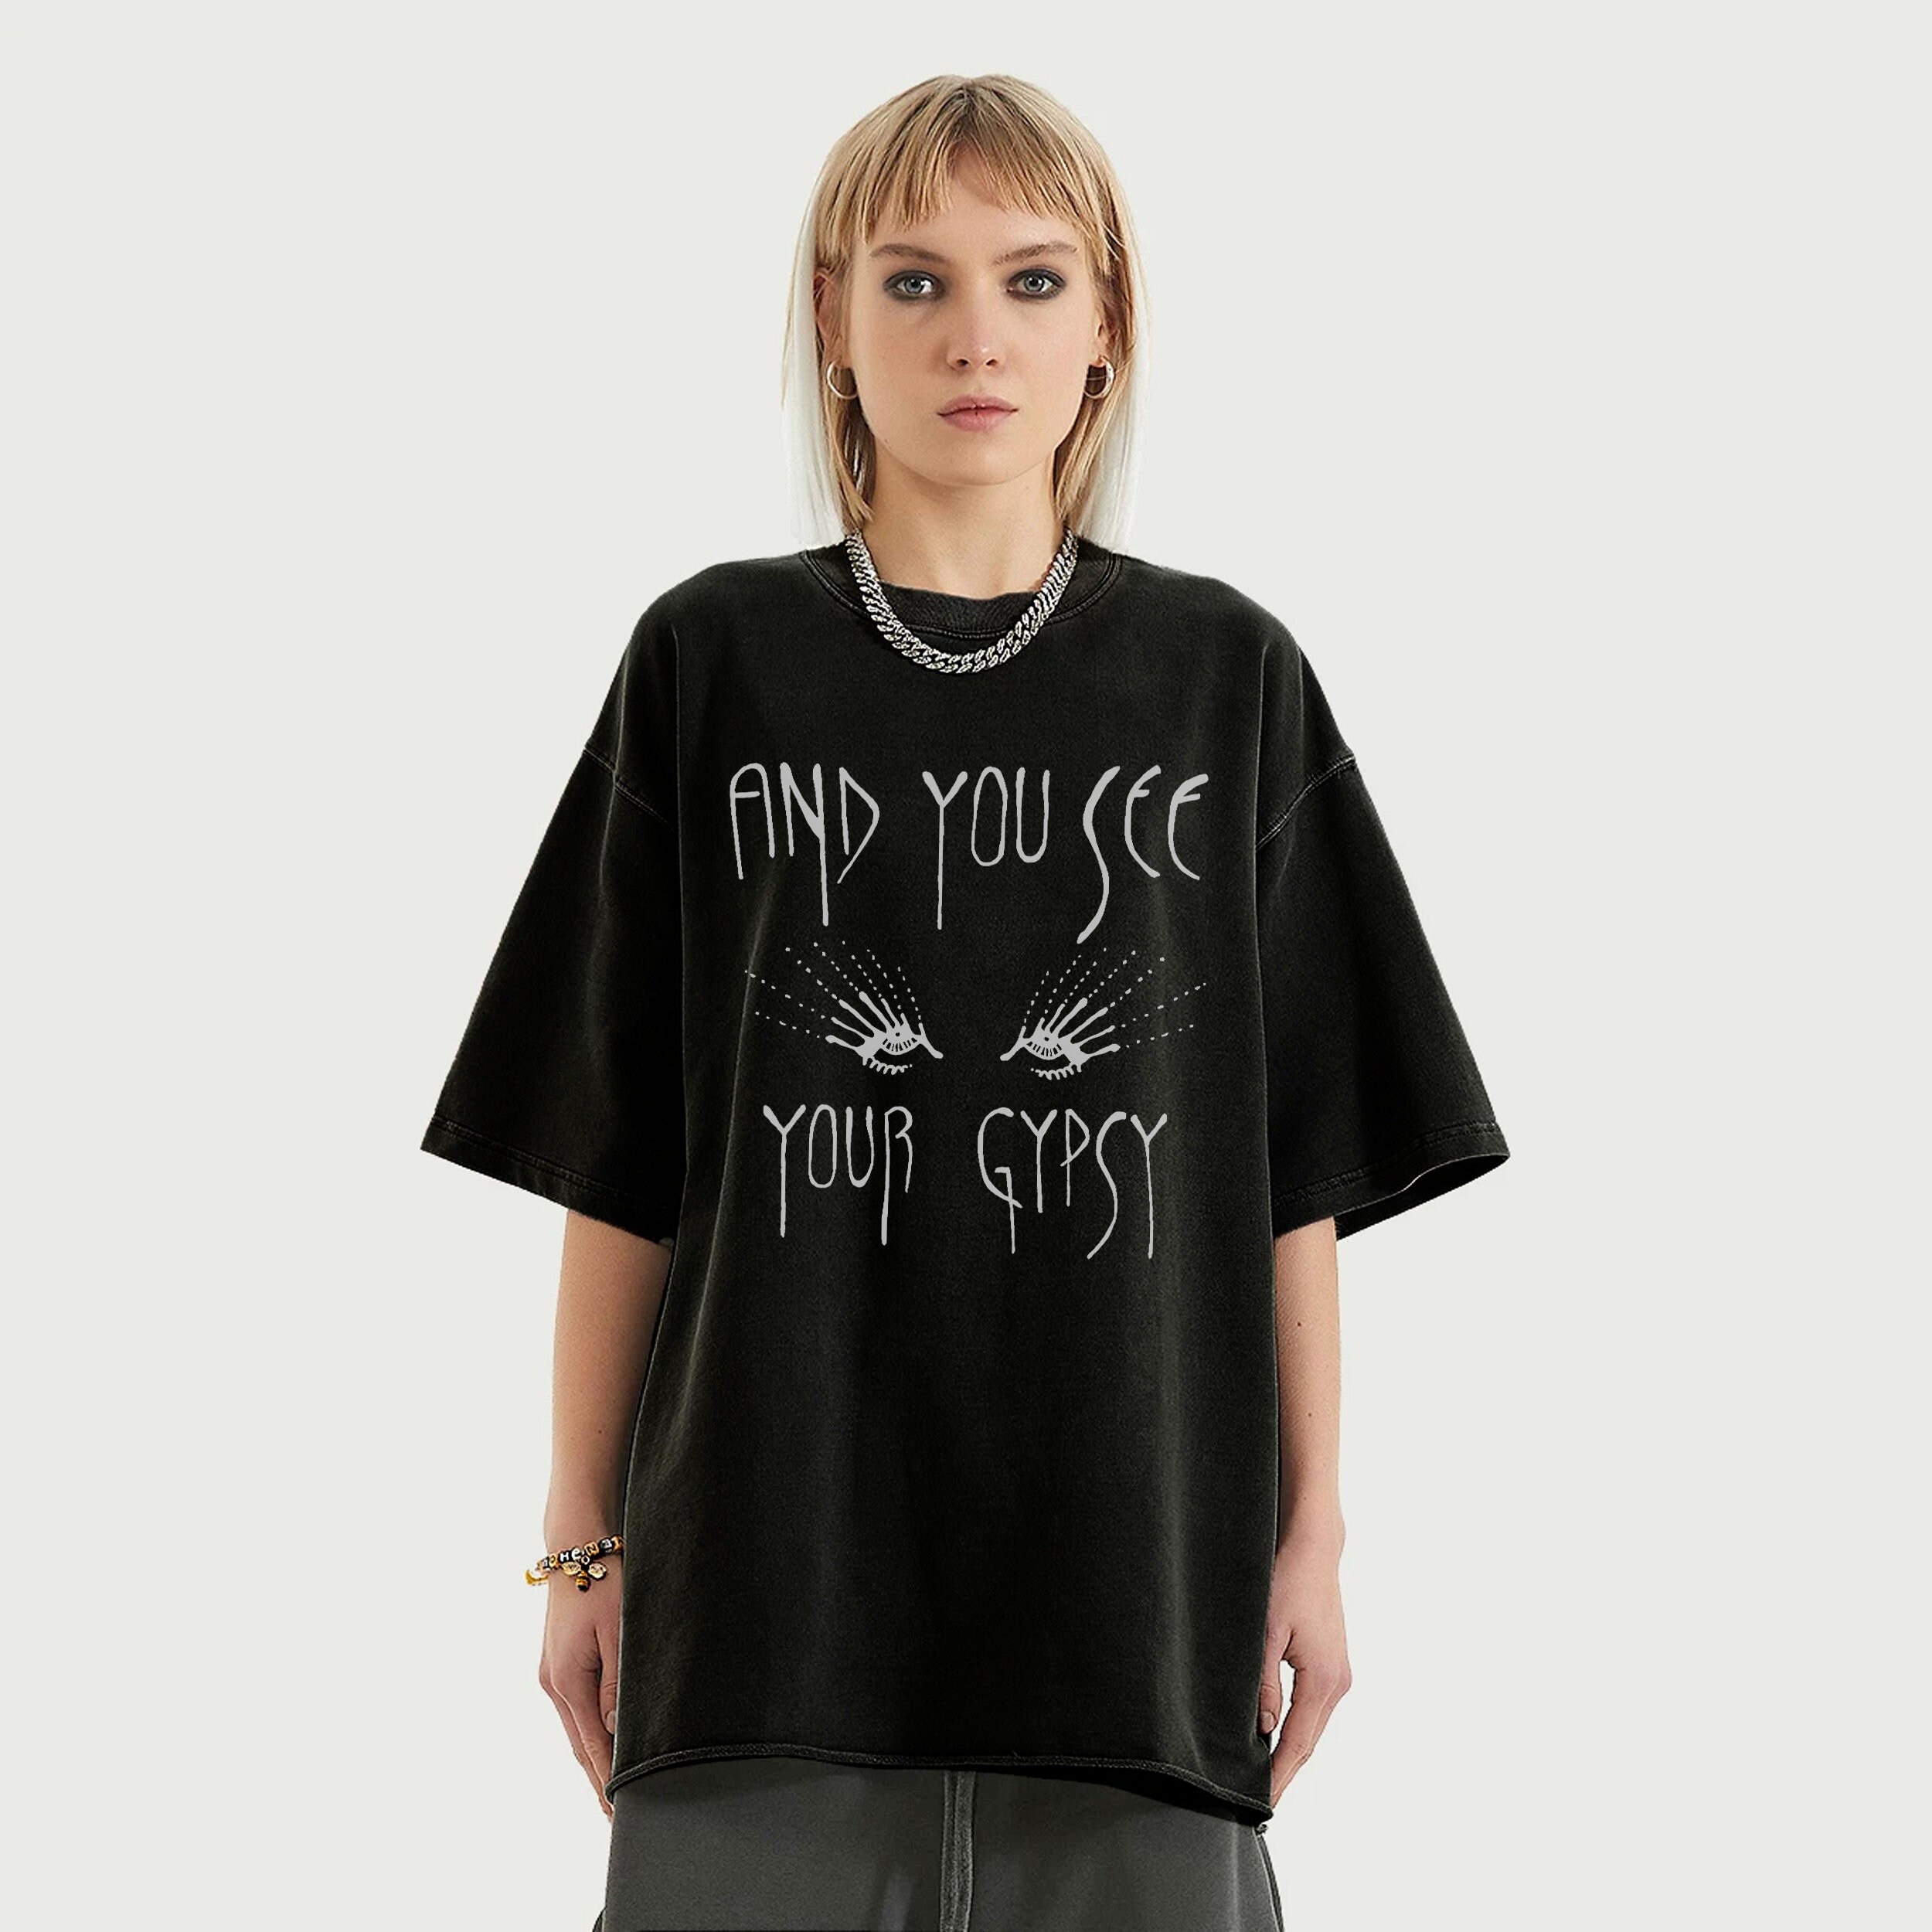 3AM Oversized Graphic Tees (Black)